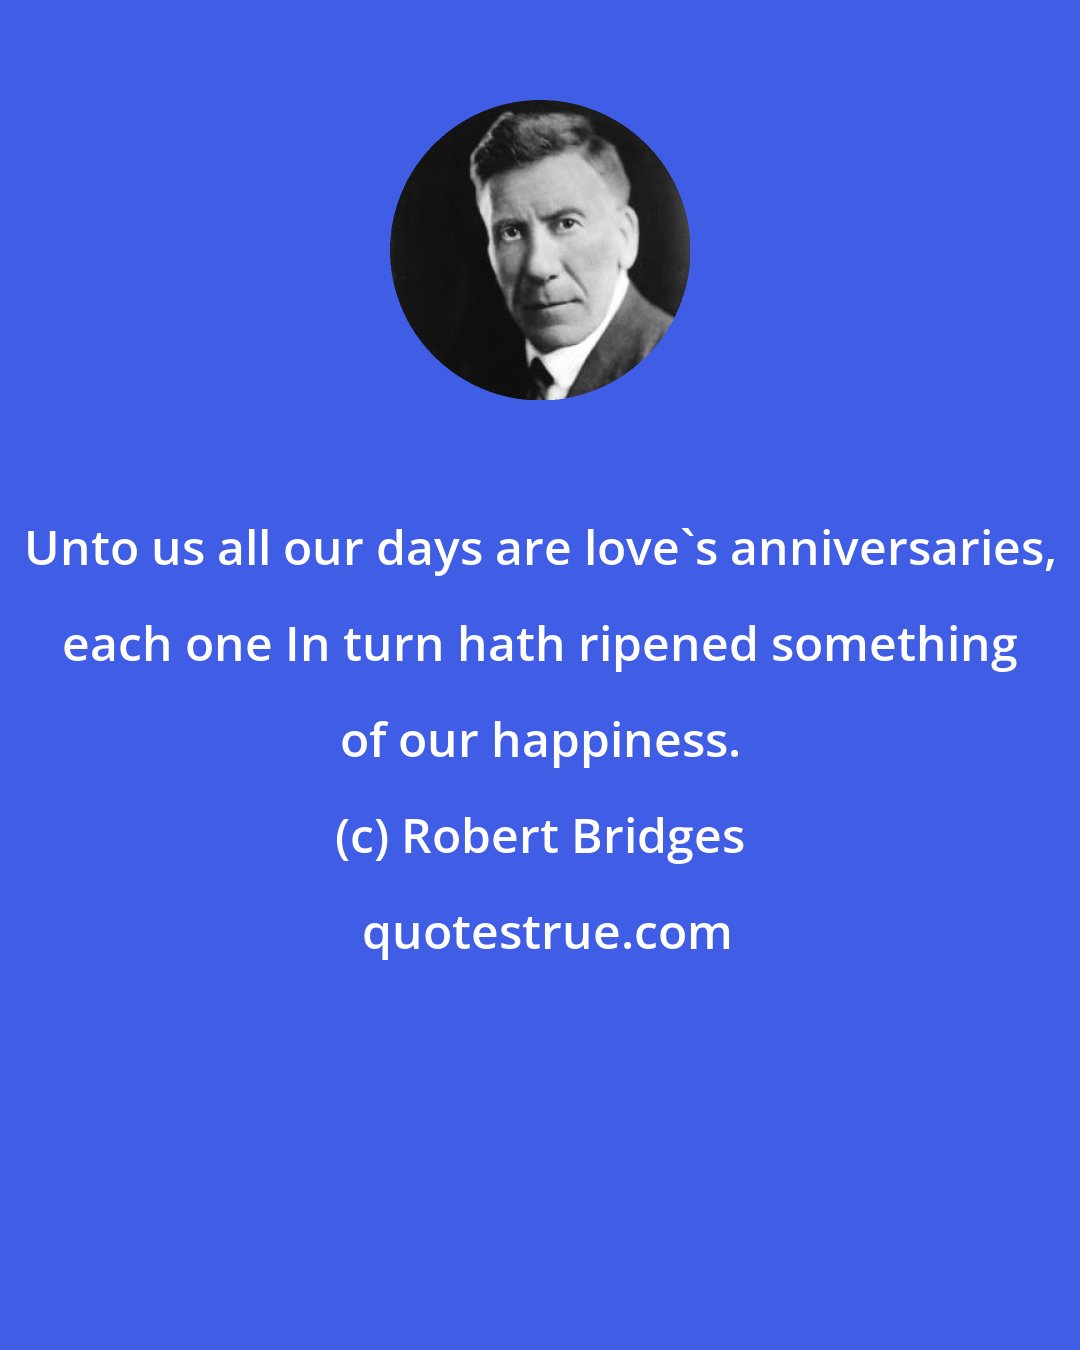 Robert Bridges: Unto us all our days are love's anniversaries, each one In turn hath ripened something of our happiness.